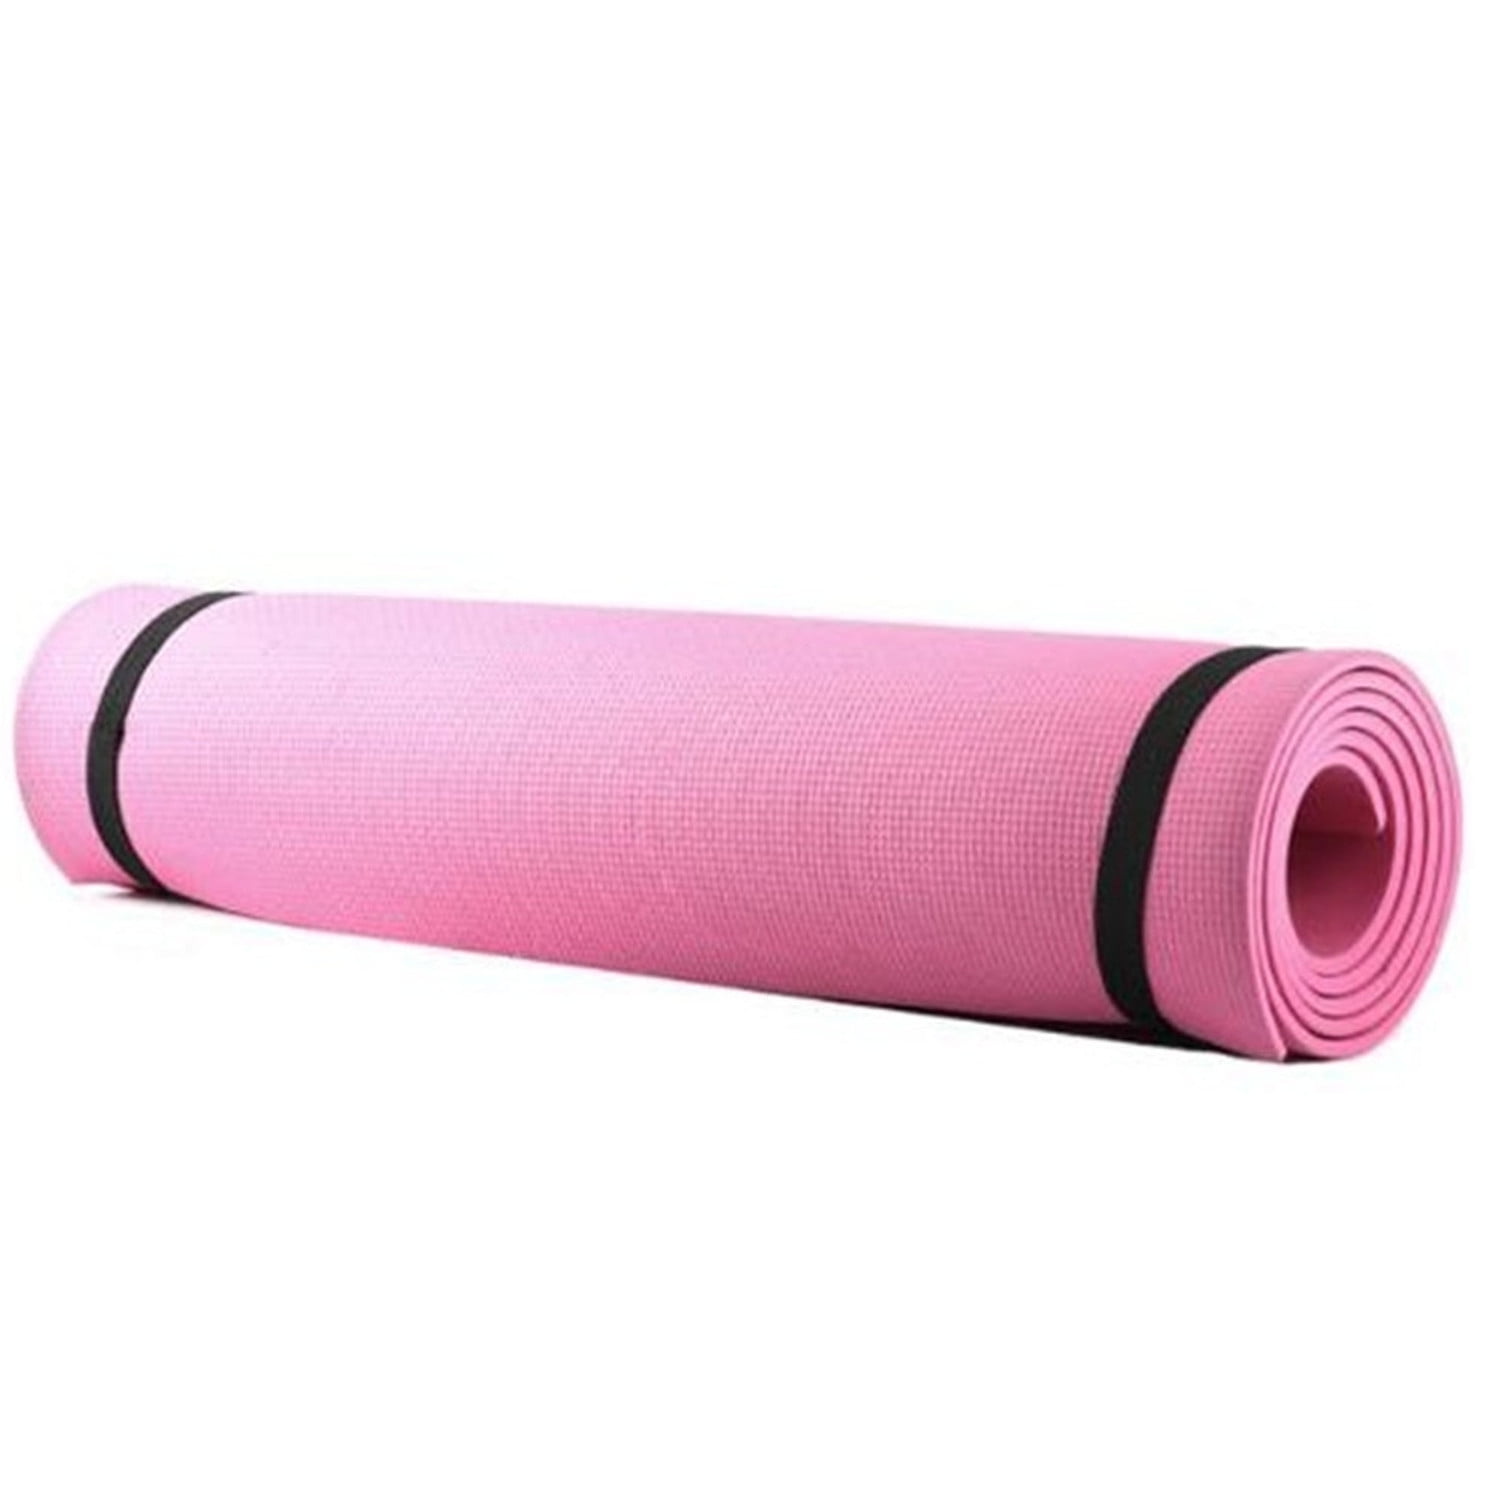 IZhansean Extra Thick Yoga Mat 6mm Non Slip Exercise Pilates Gym Picnic  Camping Straps Pink